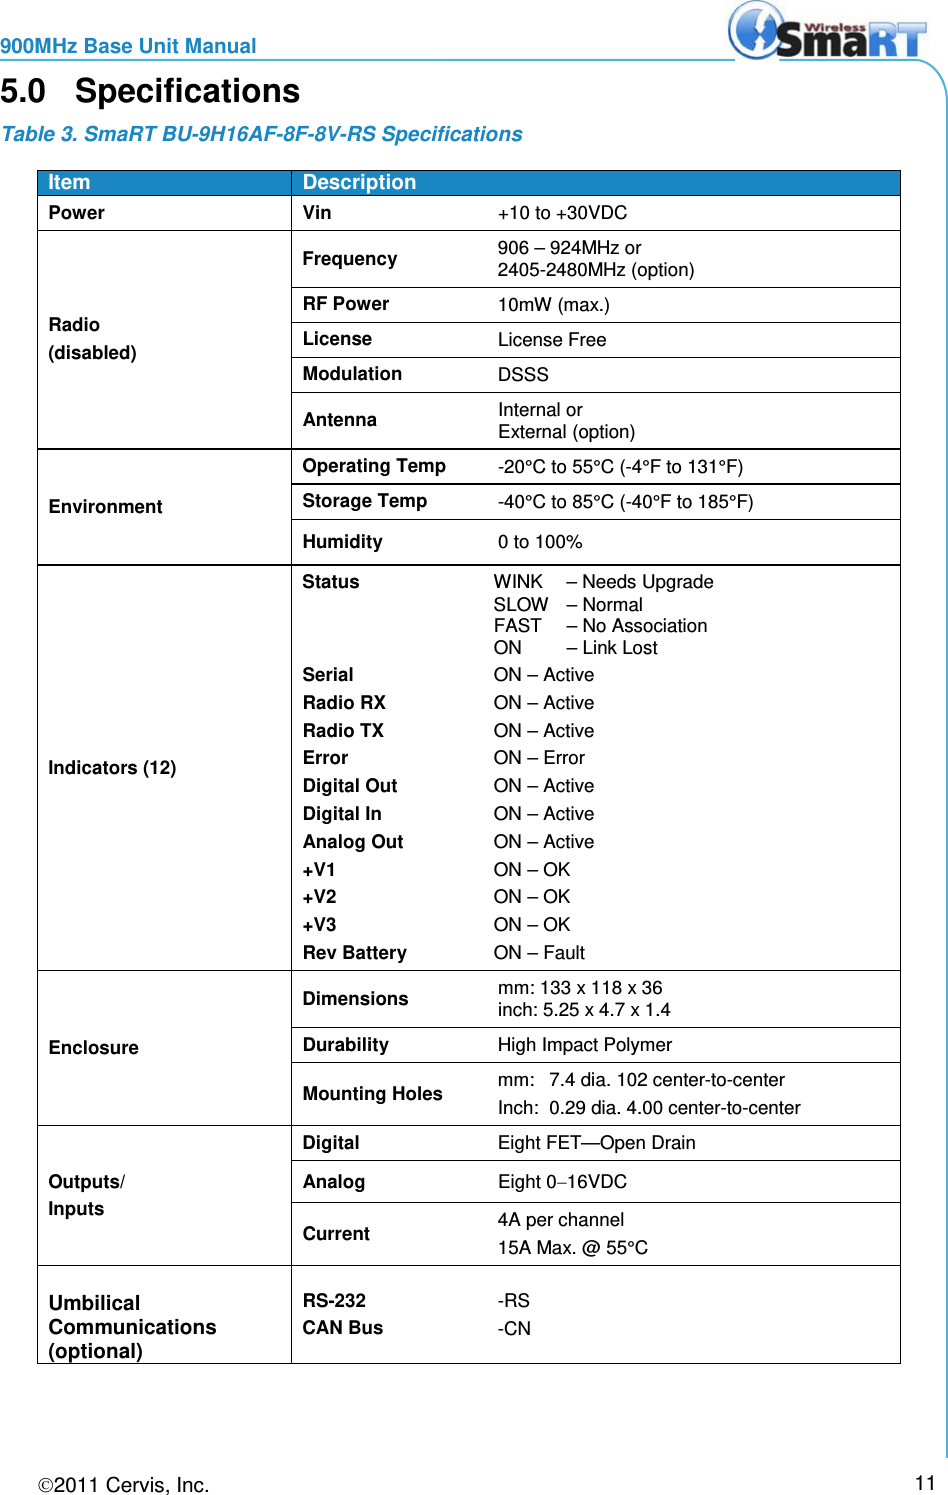 900MHz Base Unit Manual 2011 Cervis, Inc.     11 5.0  Specifications Table 3. SmaRT BU-9H16AF-8F-8V-RS Specifications  Item Description Power  Vin  +10 to +30VDC Radio (disabled) Frequency 906 – 924MHz or  2405-2480MHz (option) RF Power 10mW (max.) License License Free Modulation DSSS Antenna Internal or  External (option) Environment Operating Temp -20°C to 55°C (-4°F to 131°F) Storage Temp -40°C to 85°C (-40°F to 185°F) Humidity 0 to 100% Indicators (12) Status  WINK  – Needs Upgrade SLOW  – Normal   FAST  – No Association ON  – Link Lost Serial ON  – Active  Radio RX ON  – Active Radio TX ON  – Active Error ON – Error Digital Out ON  – Active Digital In ON  – Active Analog Out ON  – Active +V1  ON  – OK +V2  ON  – OK +V3  ON  – OK Rev Battery ON – Fault Enclosure Dimensions mm: 133 x 118 x 36 inch: 5.25 x 4.7 x 1.4 Durability High Impact Polymer Mounting Holes mm: 7.4 dia. 102 center-to-center Inch: 0.29 dia. 4.00 center-to-center Outputs/ Inputs Digital Eight FET—Open Drain Analog Eight 0−16VDC Current 4A per channel 15A Max. @ 55°C Umbilical Communications (optional) RS-232 CAN Bus -RS -CN  